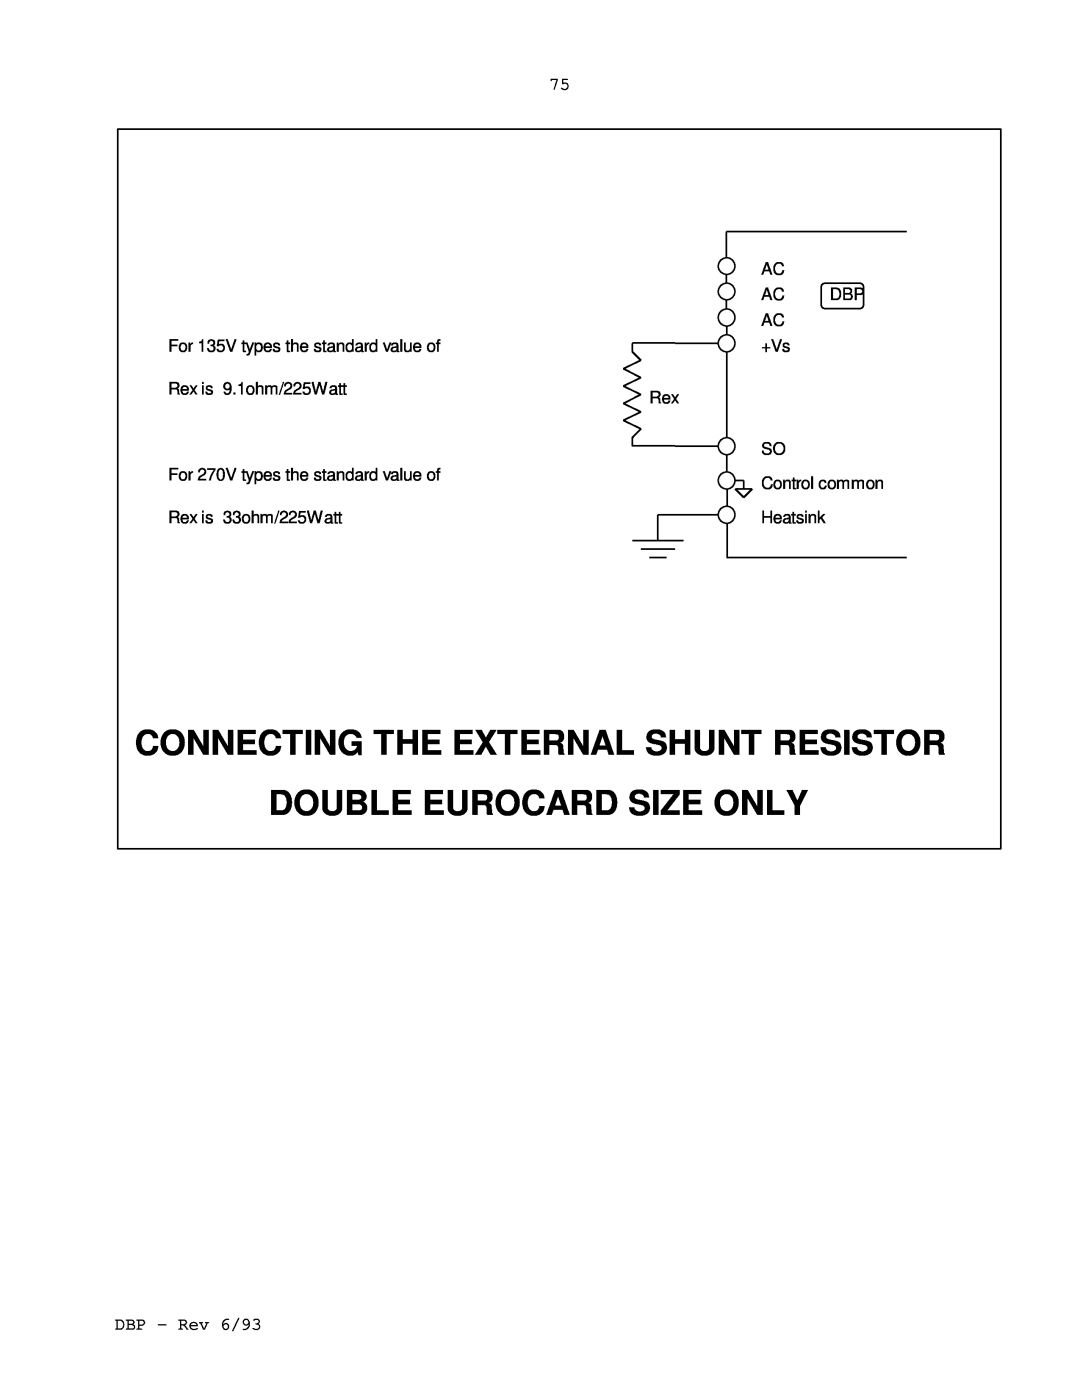 Elmo DBP SERIES manual Connecting The External Shunt Resistor, Double Eurocard Size Only, DBP - Rev 6/93 